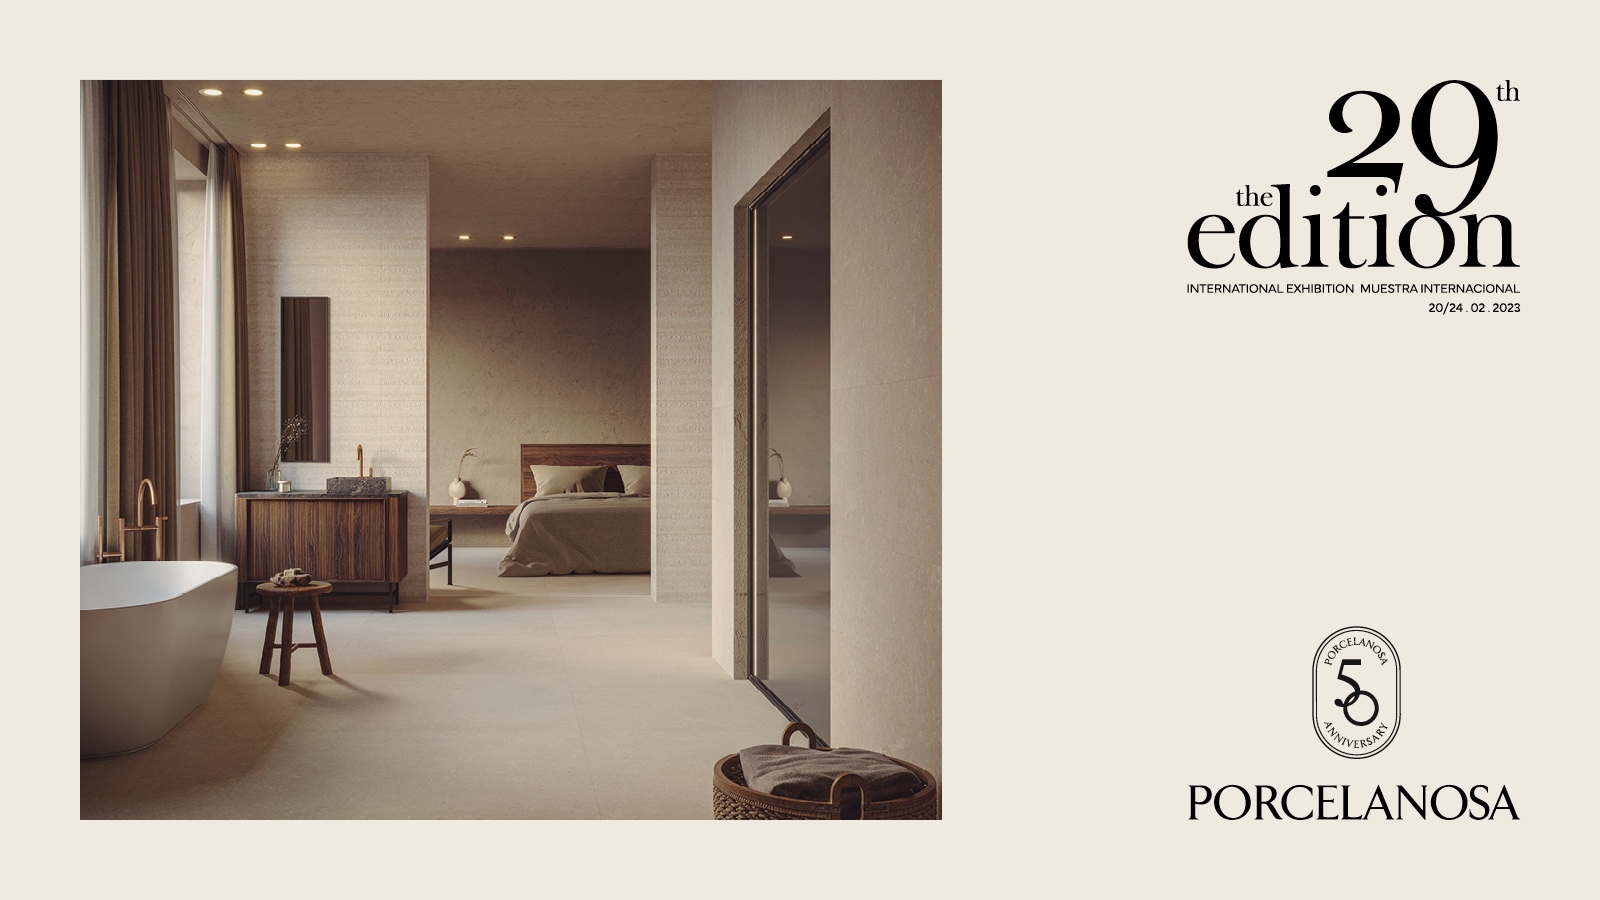 PORCELANOSA Group will hold a special edition of its International Exhibition to commemorate its 50th anniversary